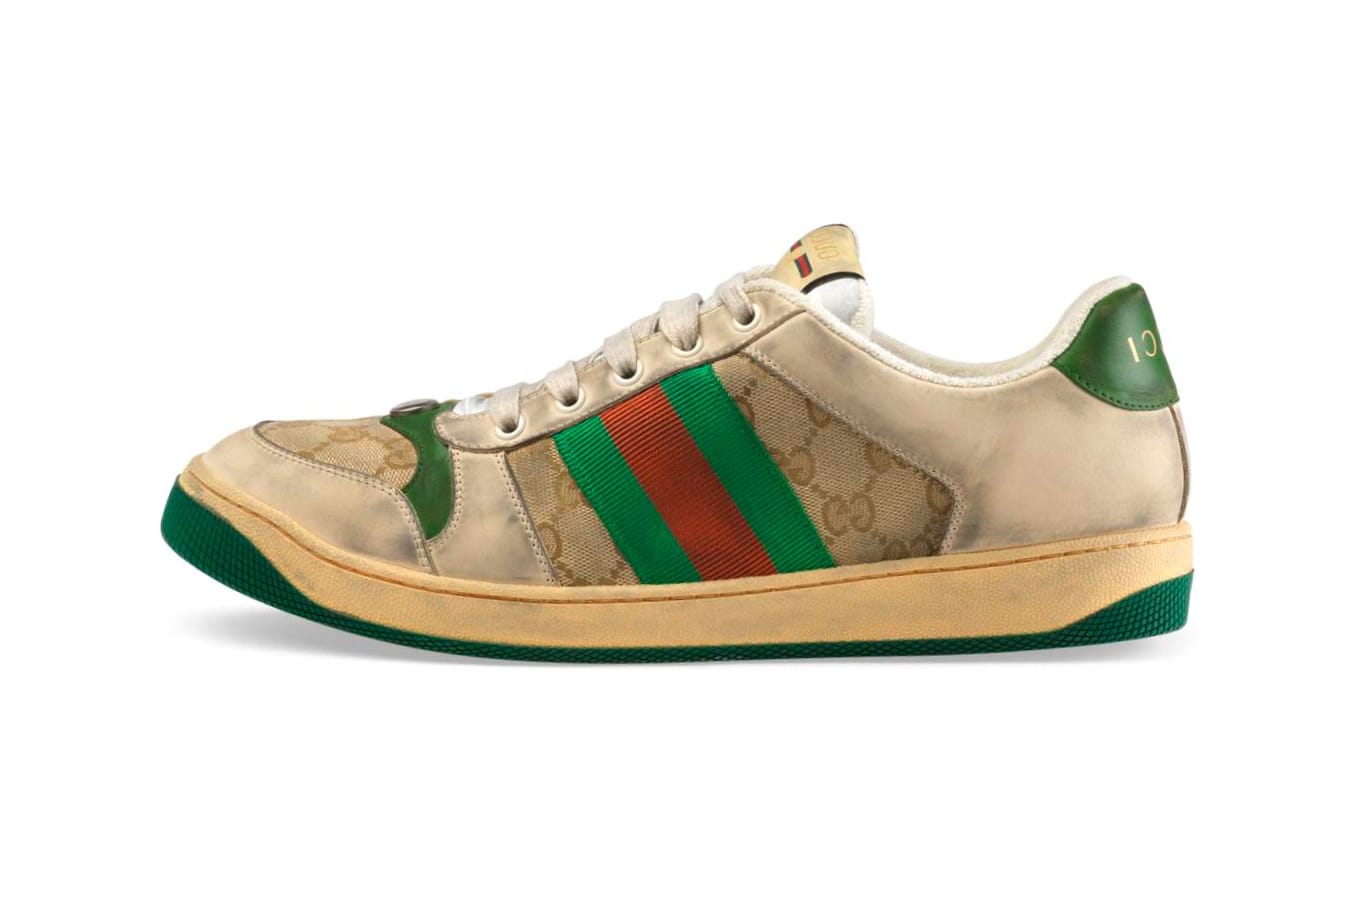 gucci distressed leather sneaker